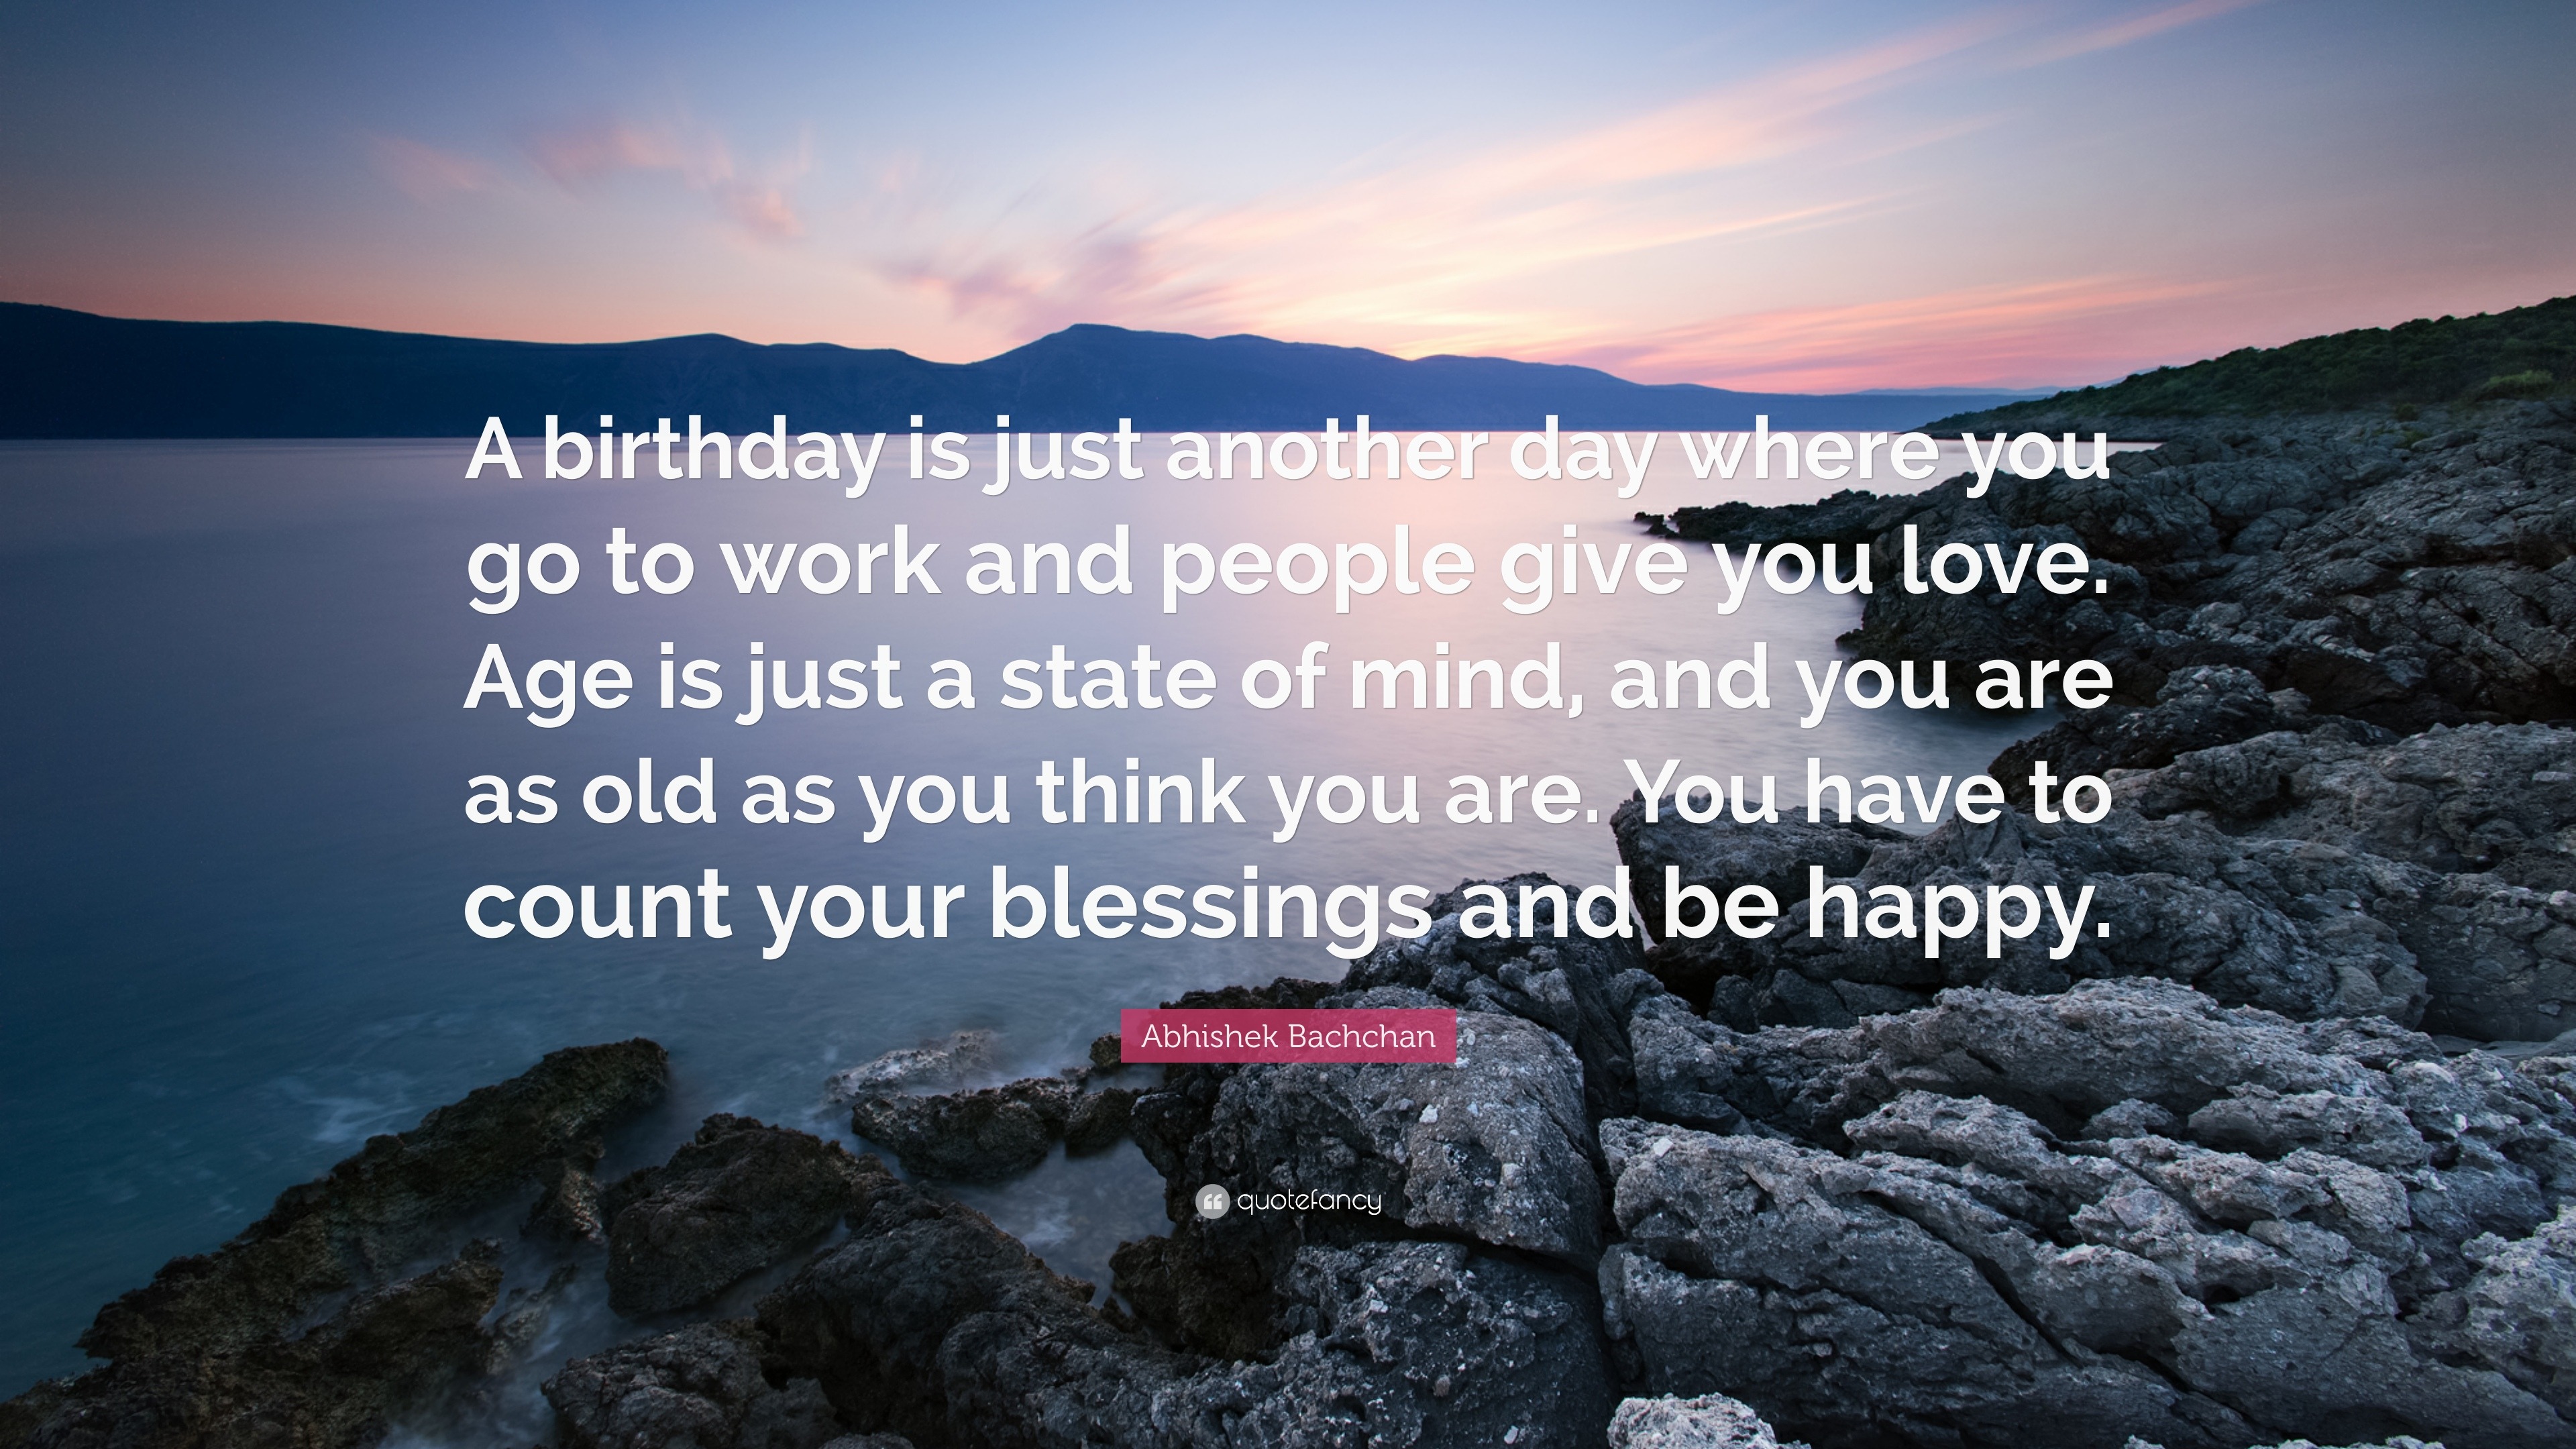 Abhishek Bachchan Quote: “A birthday is just another day where you go ...